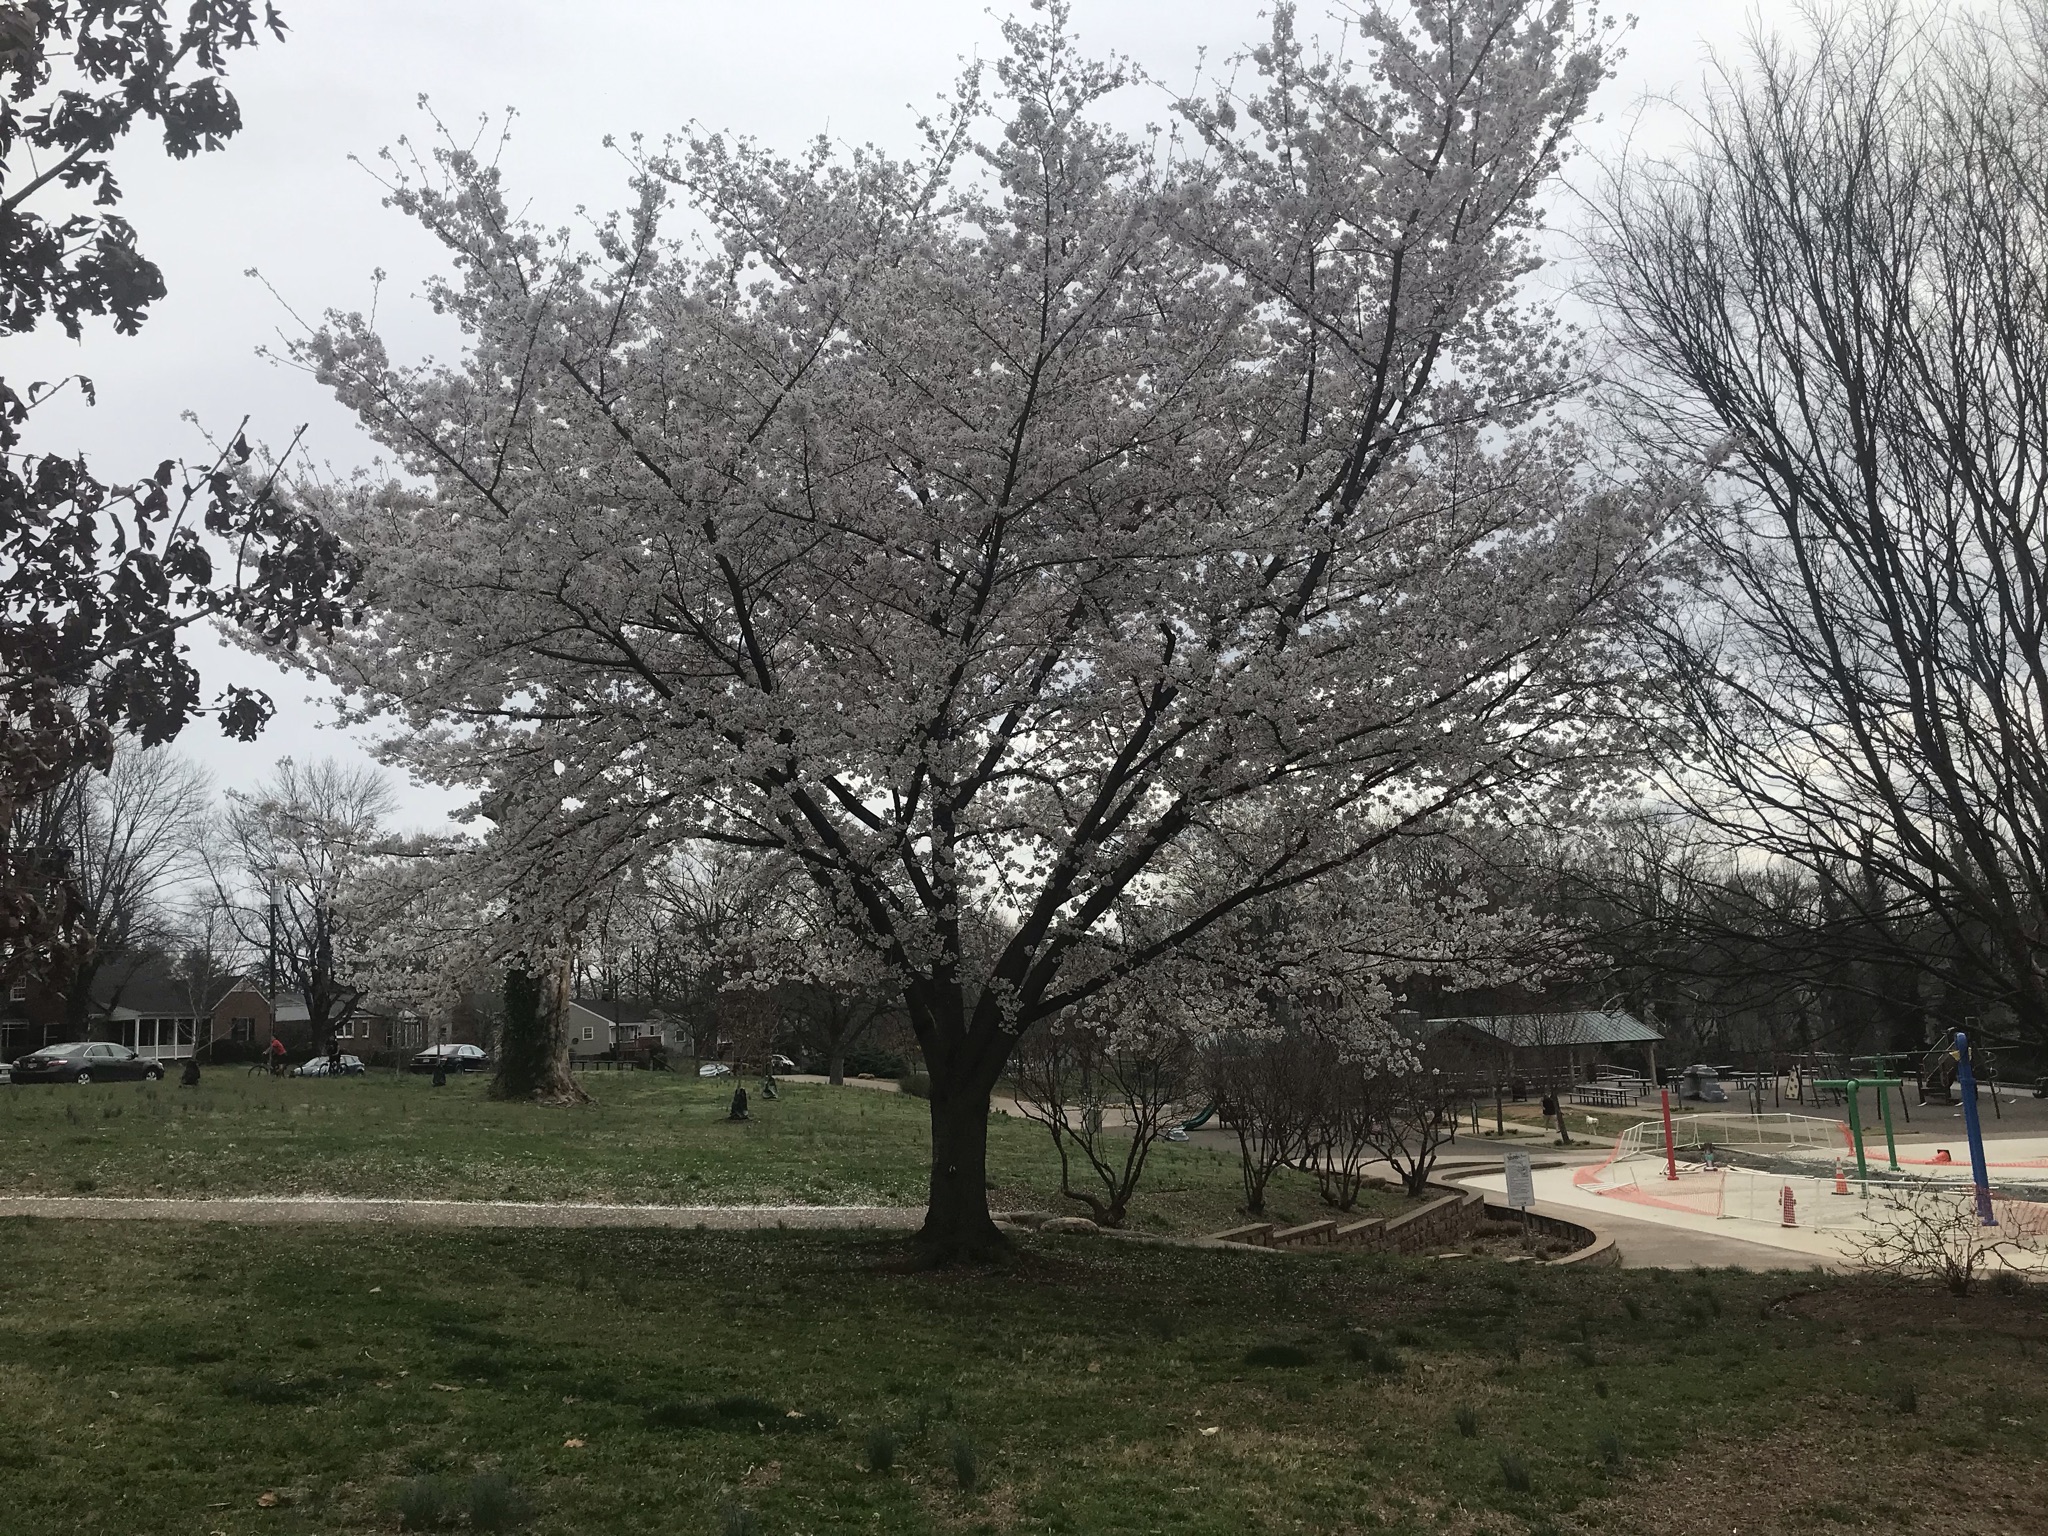 A cherry tree in bloom in Forest Hills Park on March 20, 2020